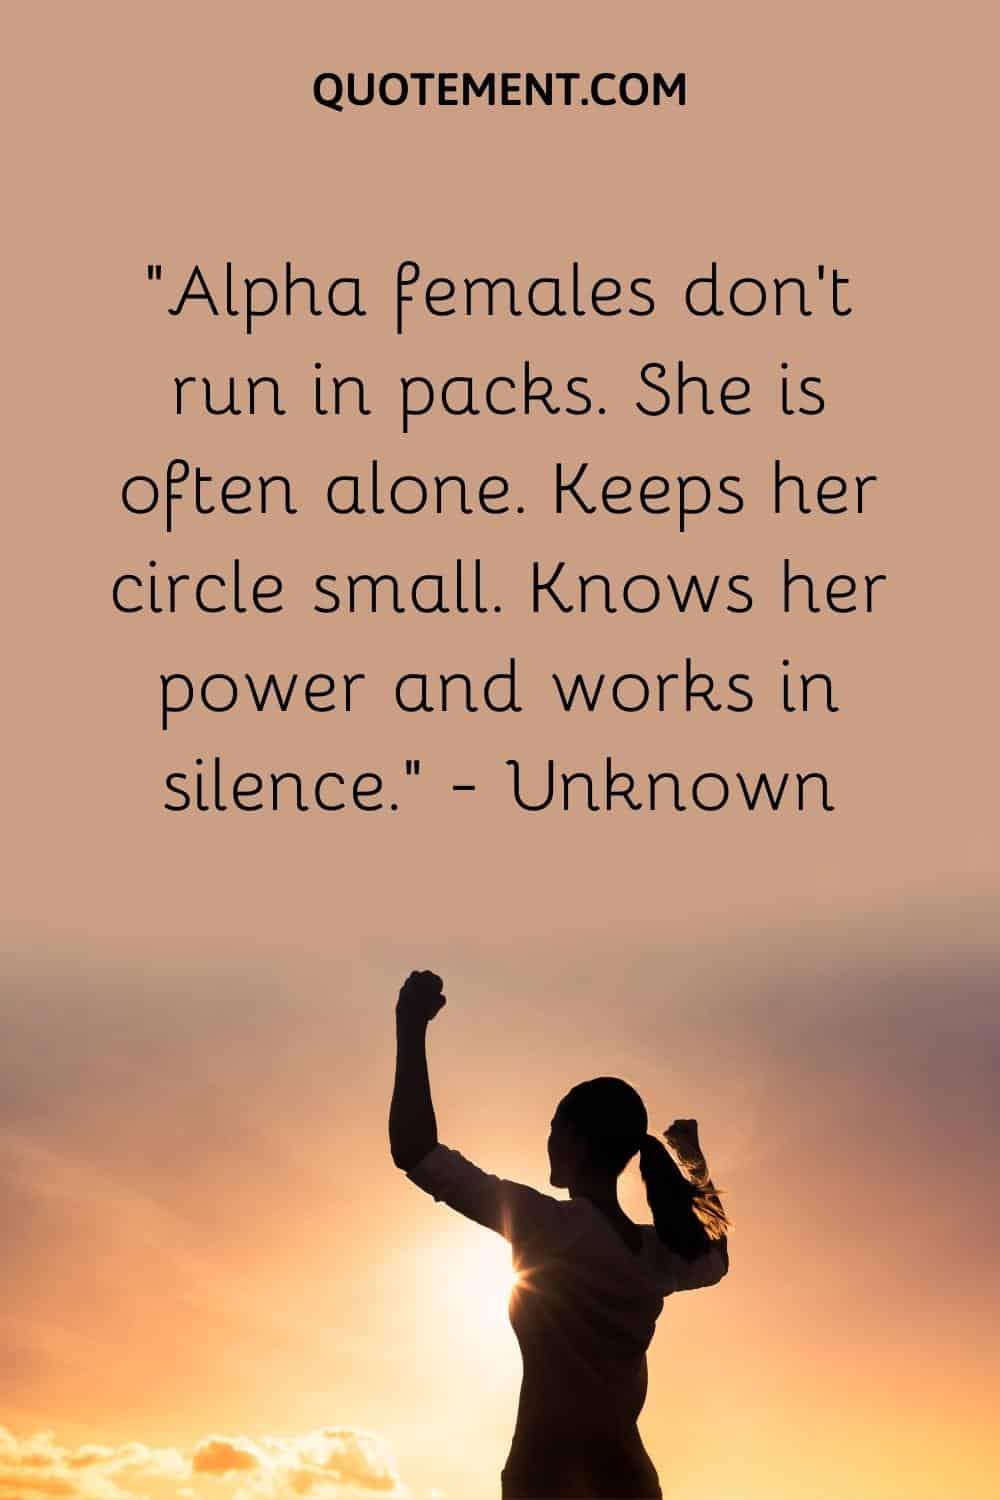 Alpha females don’t run in packs. She is often alone. Keeps her circle small